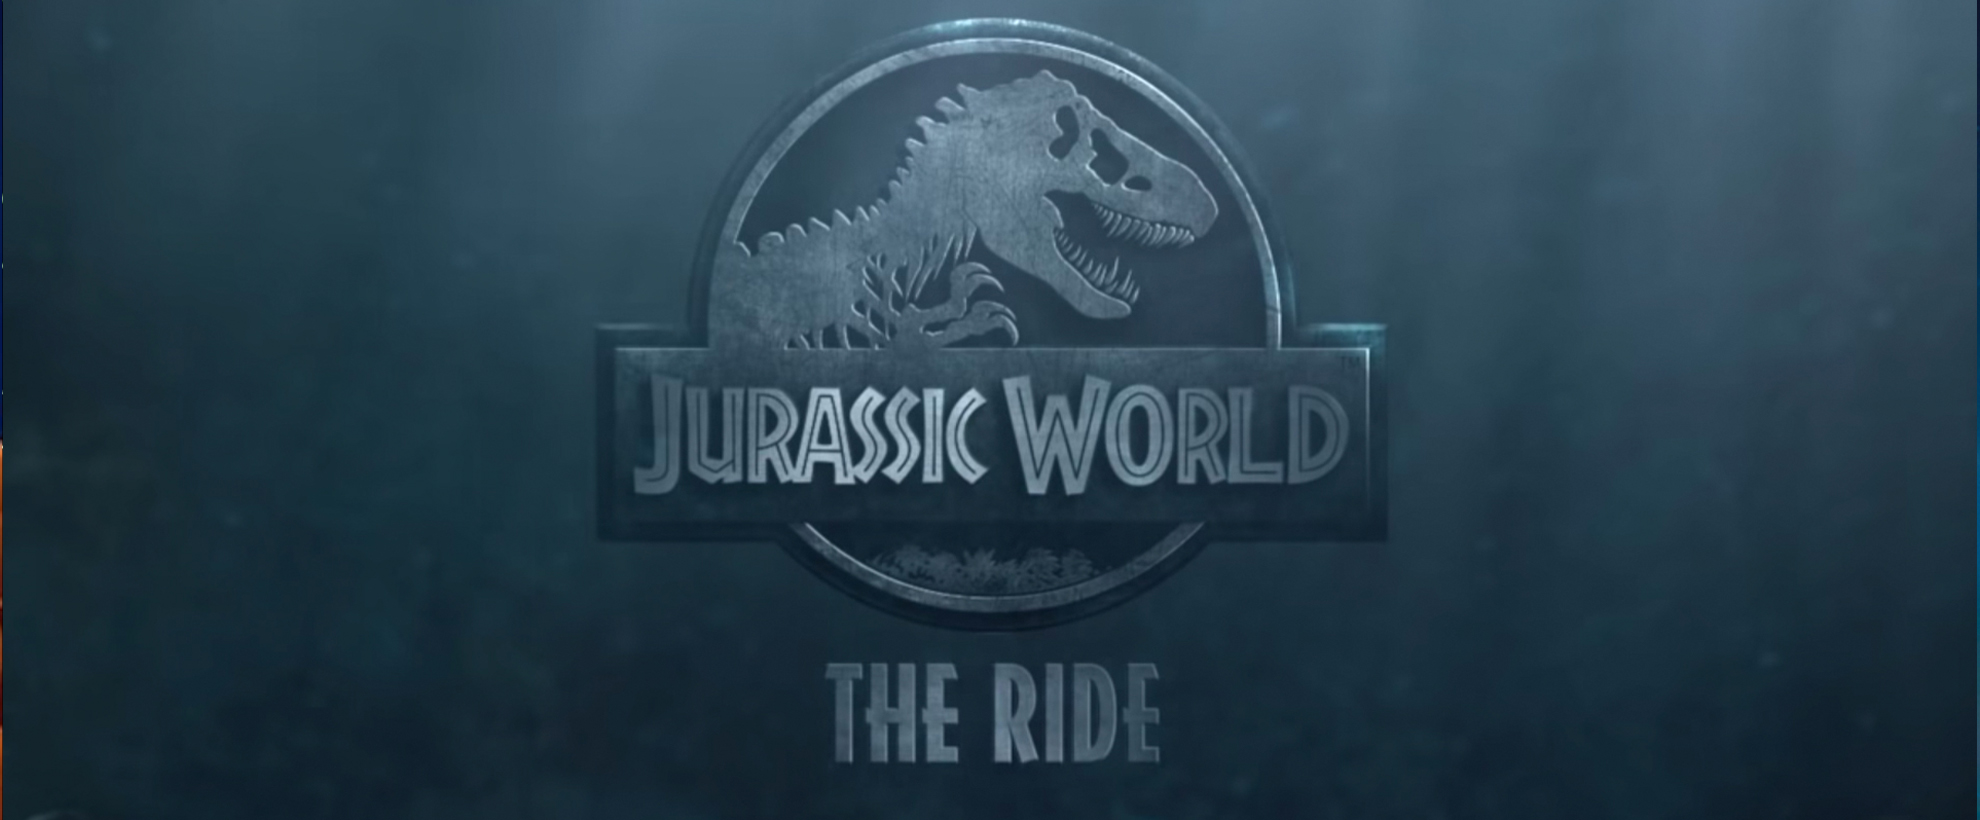 The Jurassic World logo. Gray, worn in background. There is a T-Rex dinosaur in the logo. It says Jurassic World and underneath it says The Ride